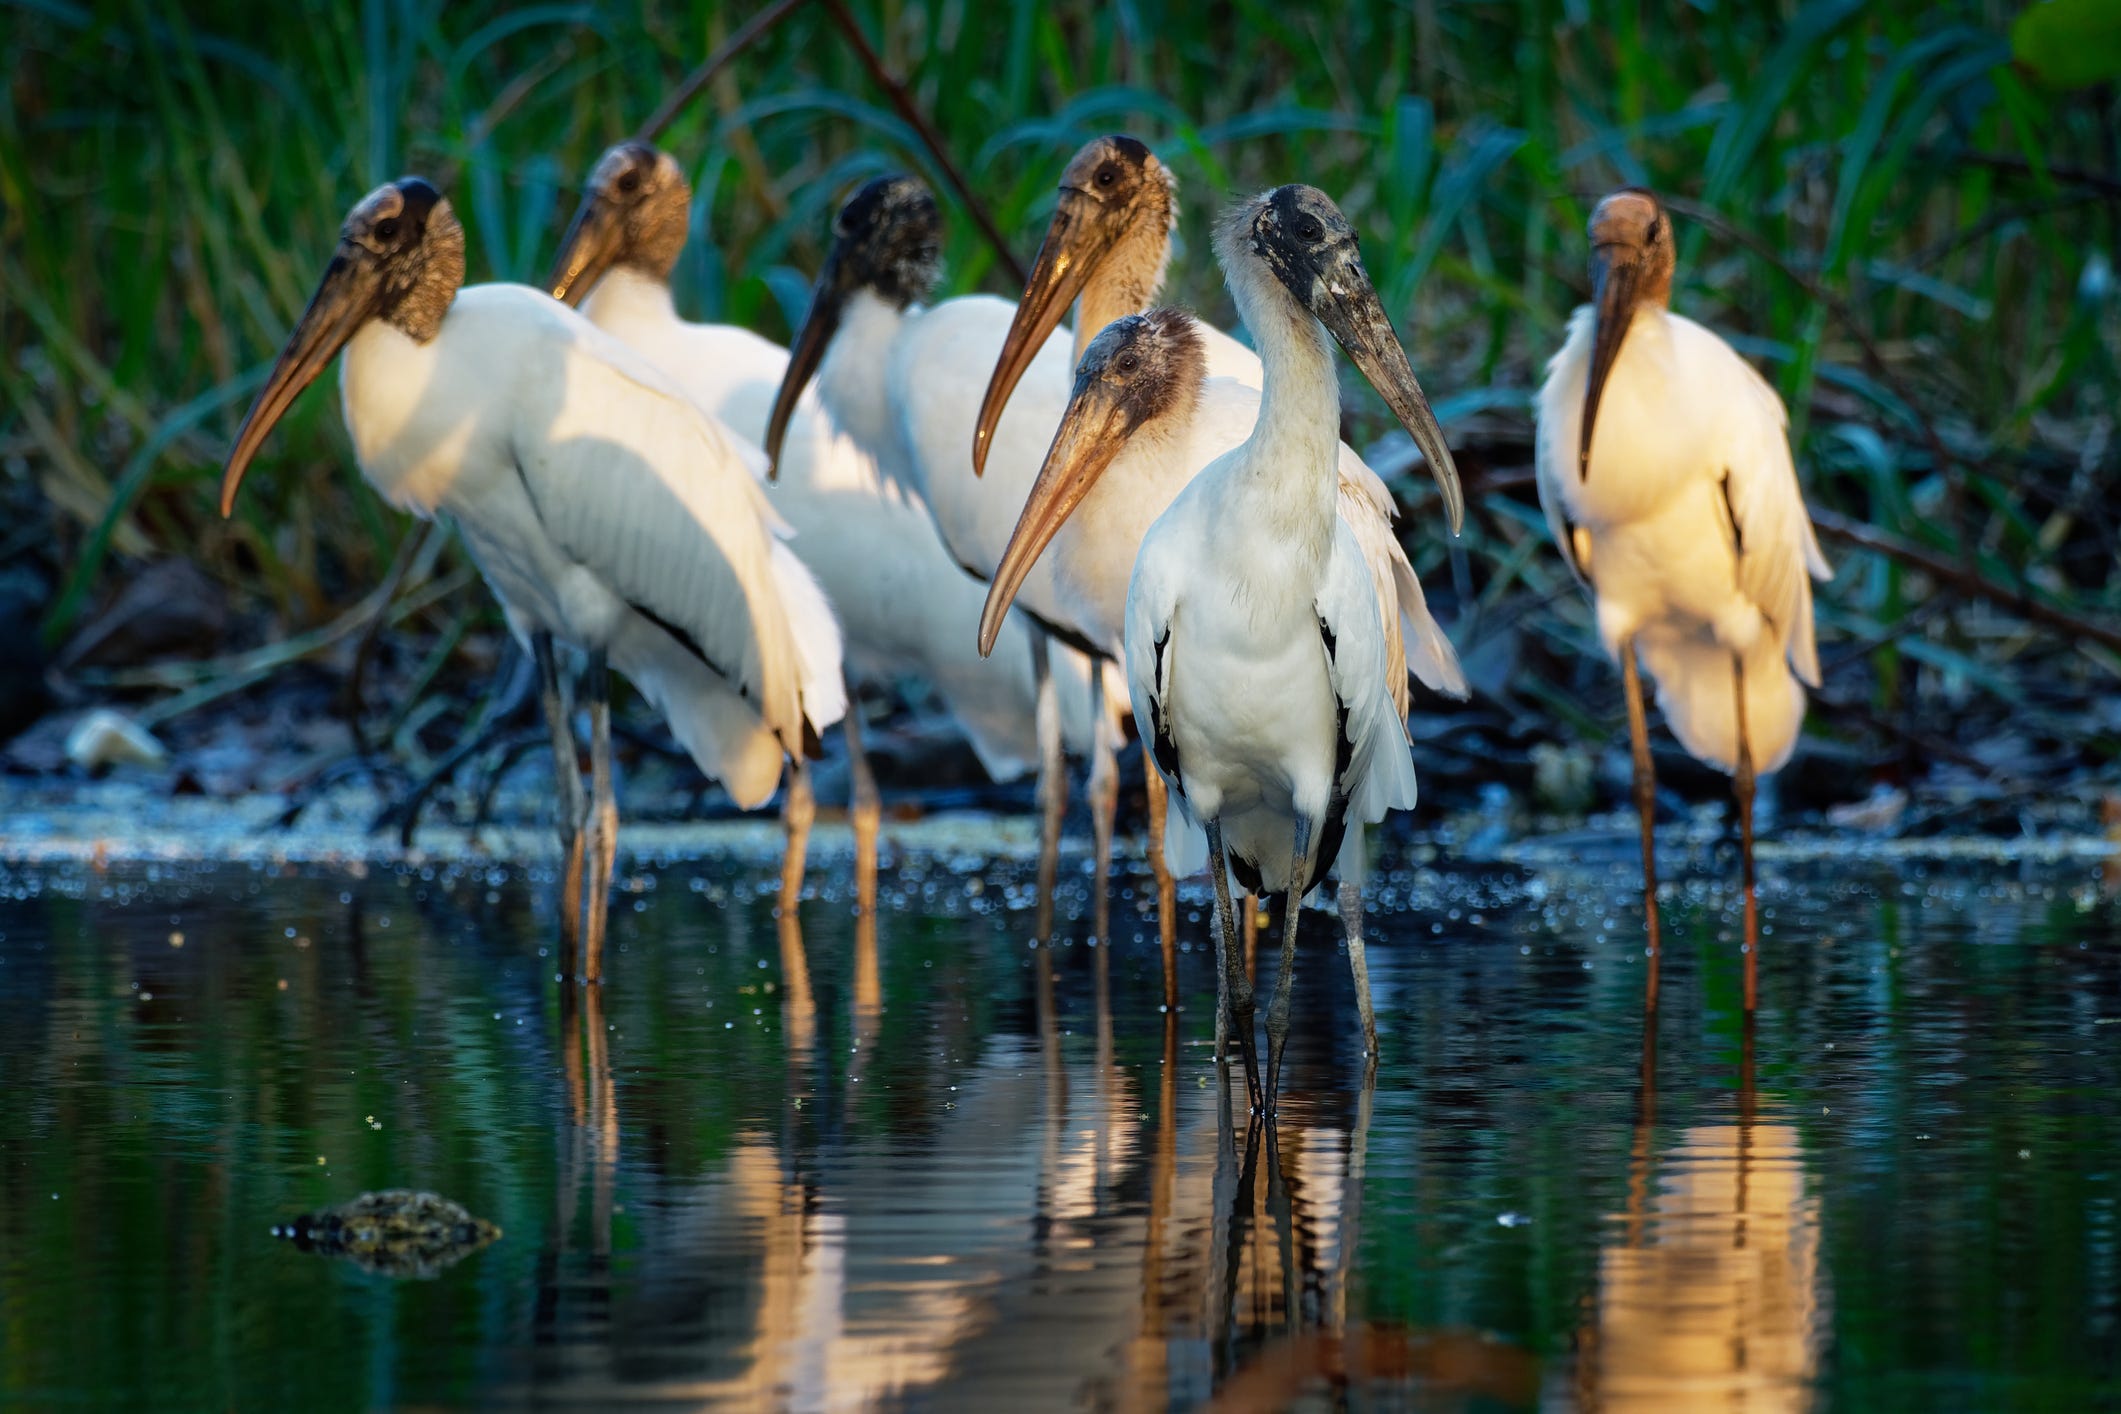 Wood storks in Naples, Florida, which has an abundance of natural splendor to enjoy.